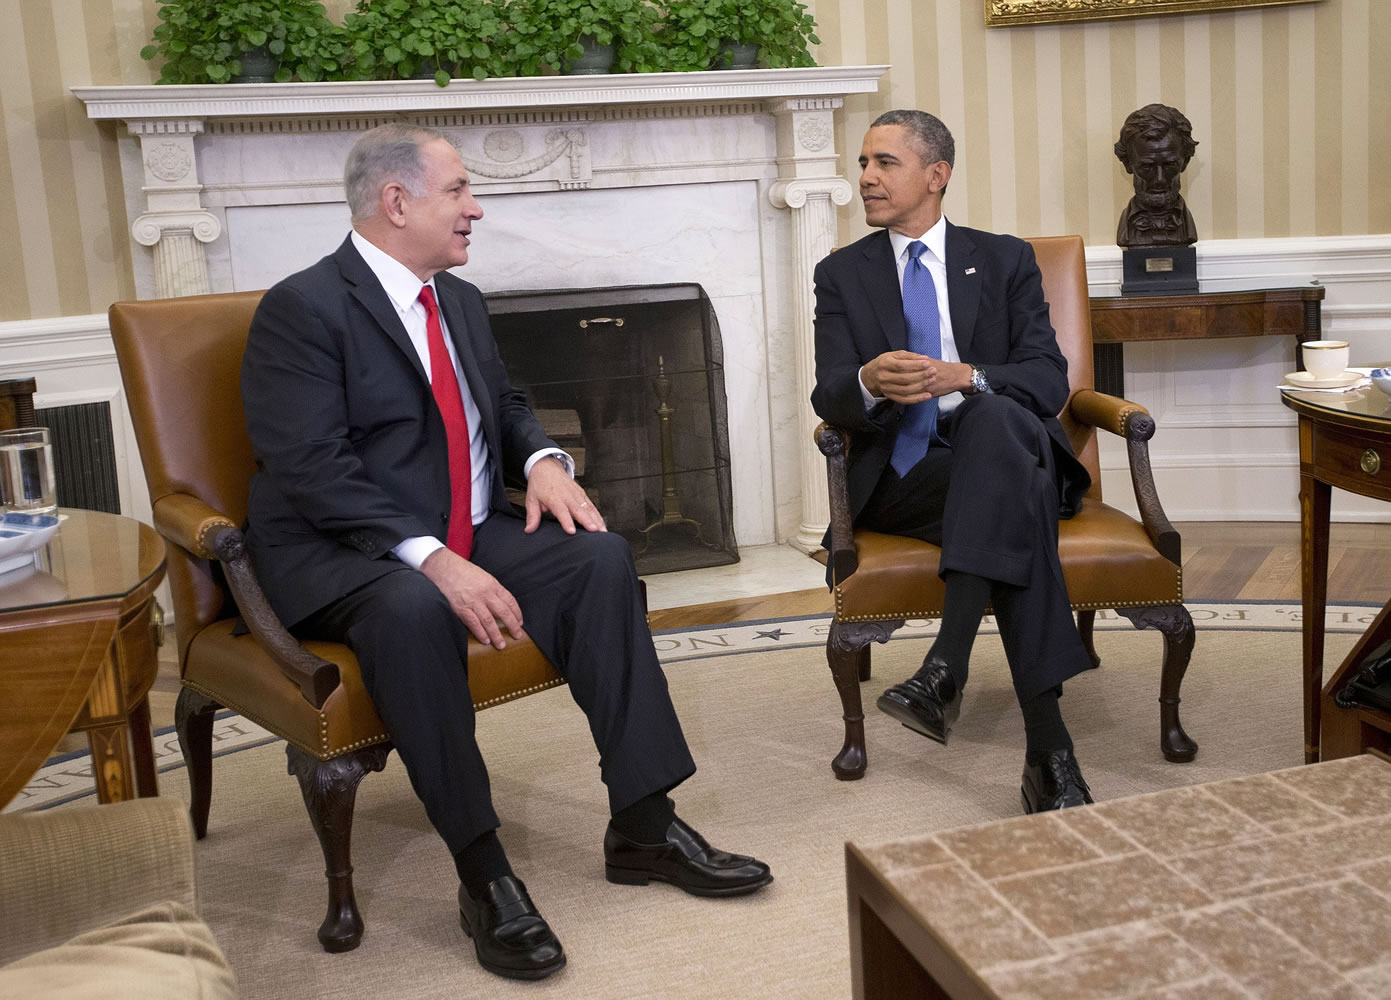 President Barack Obama meets with Israeli Prime Minister Benjamin Netanyahu in March in the Oval Office of the White House in Washington.